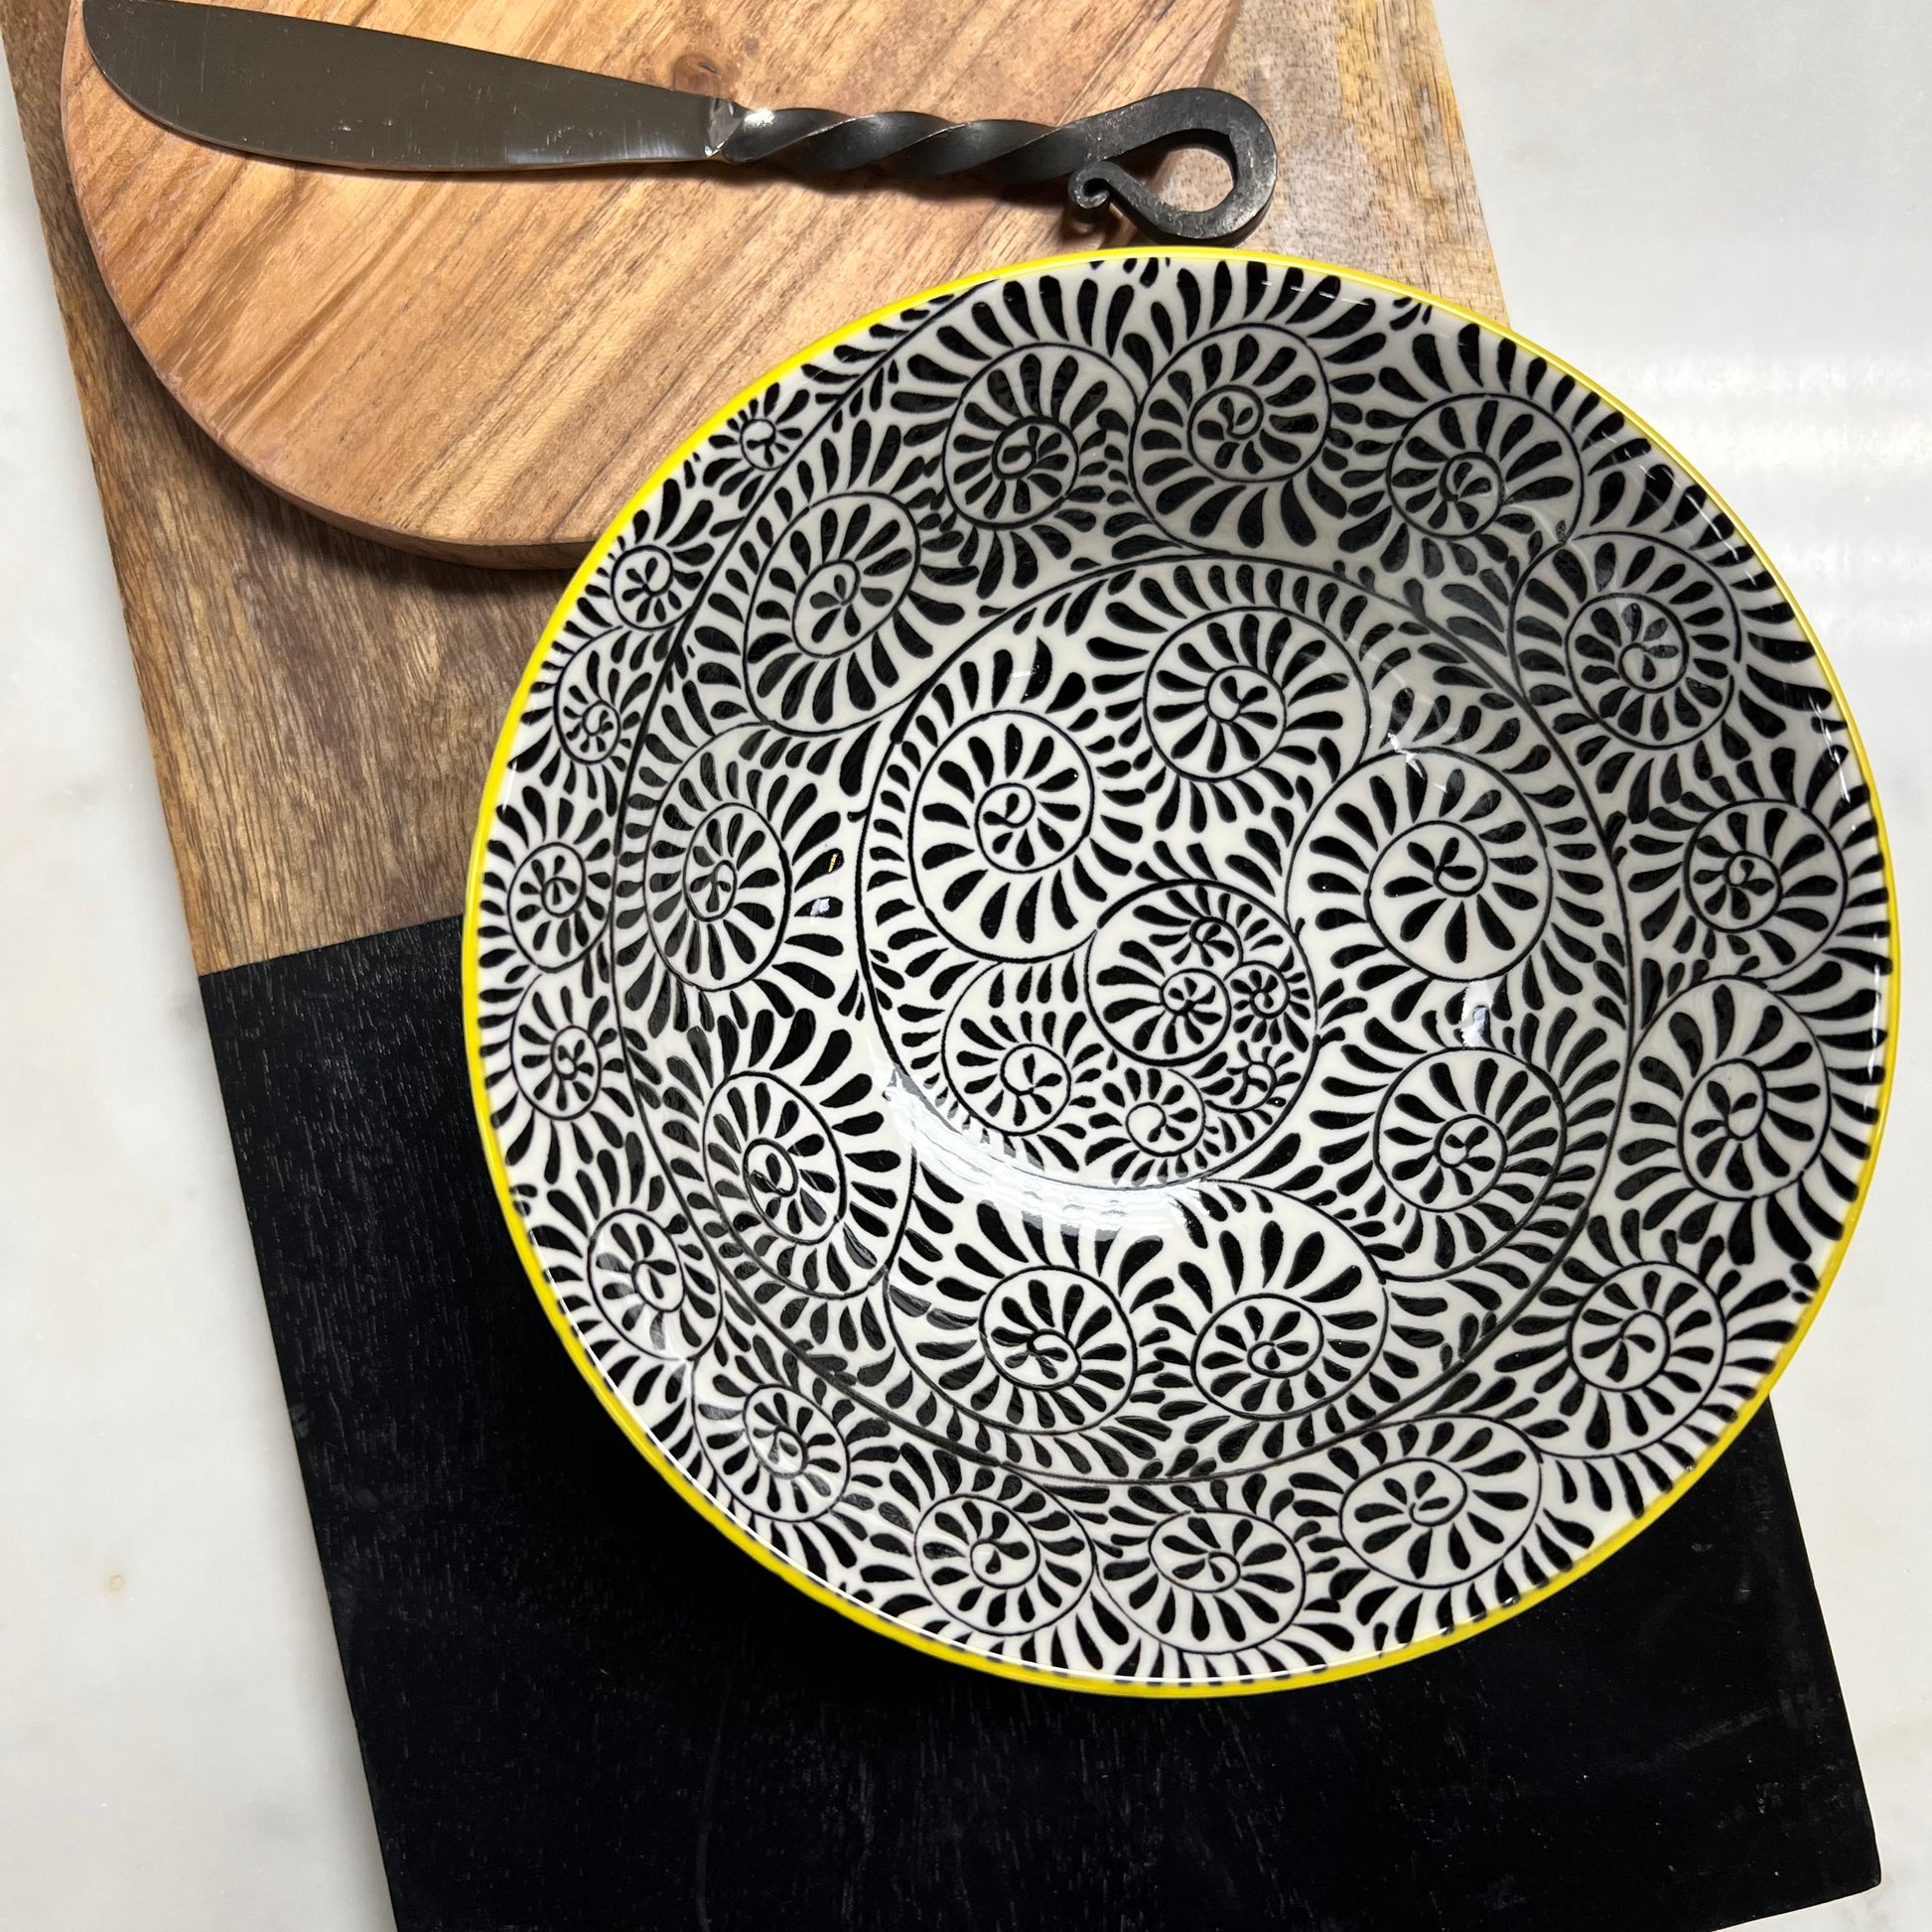 top view of black and white bowl on wood boards with spreader.